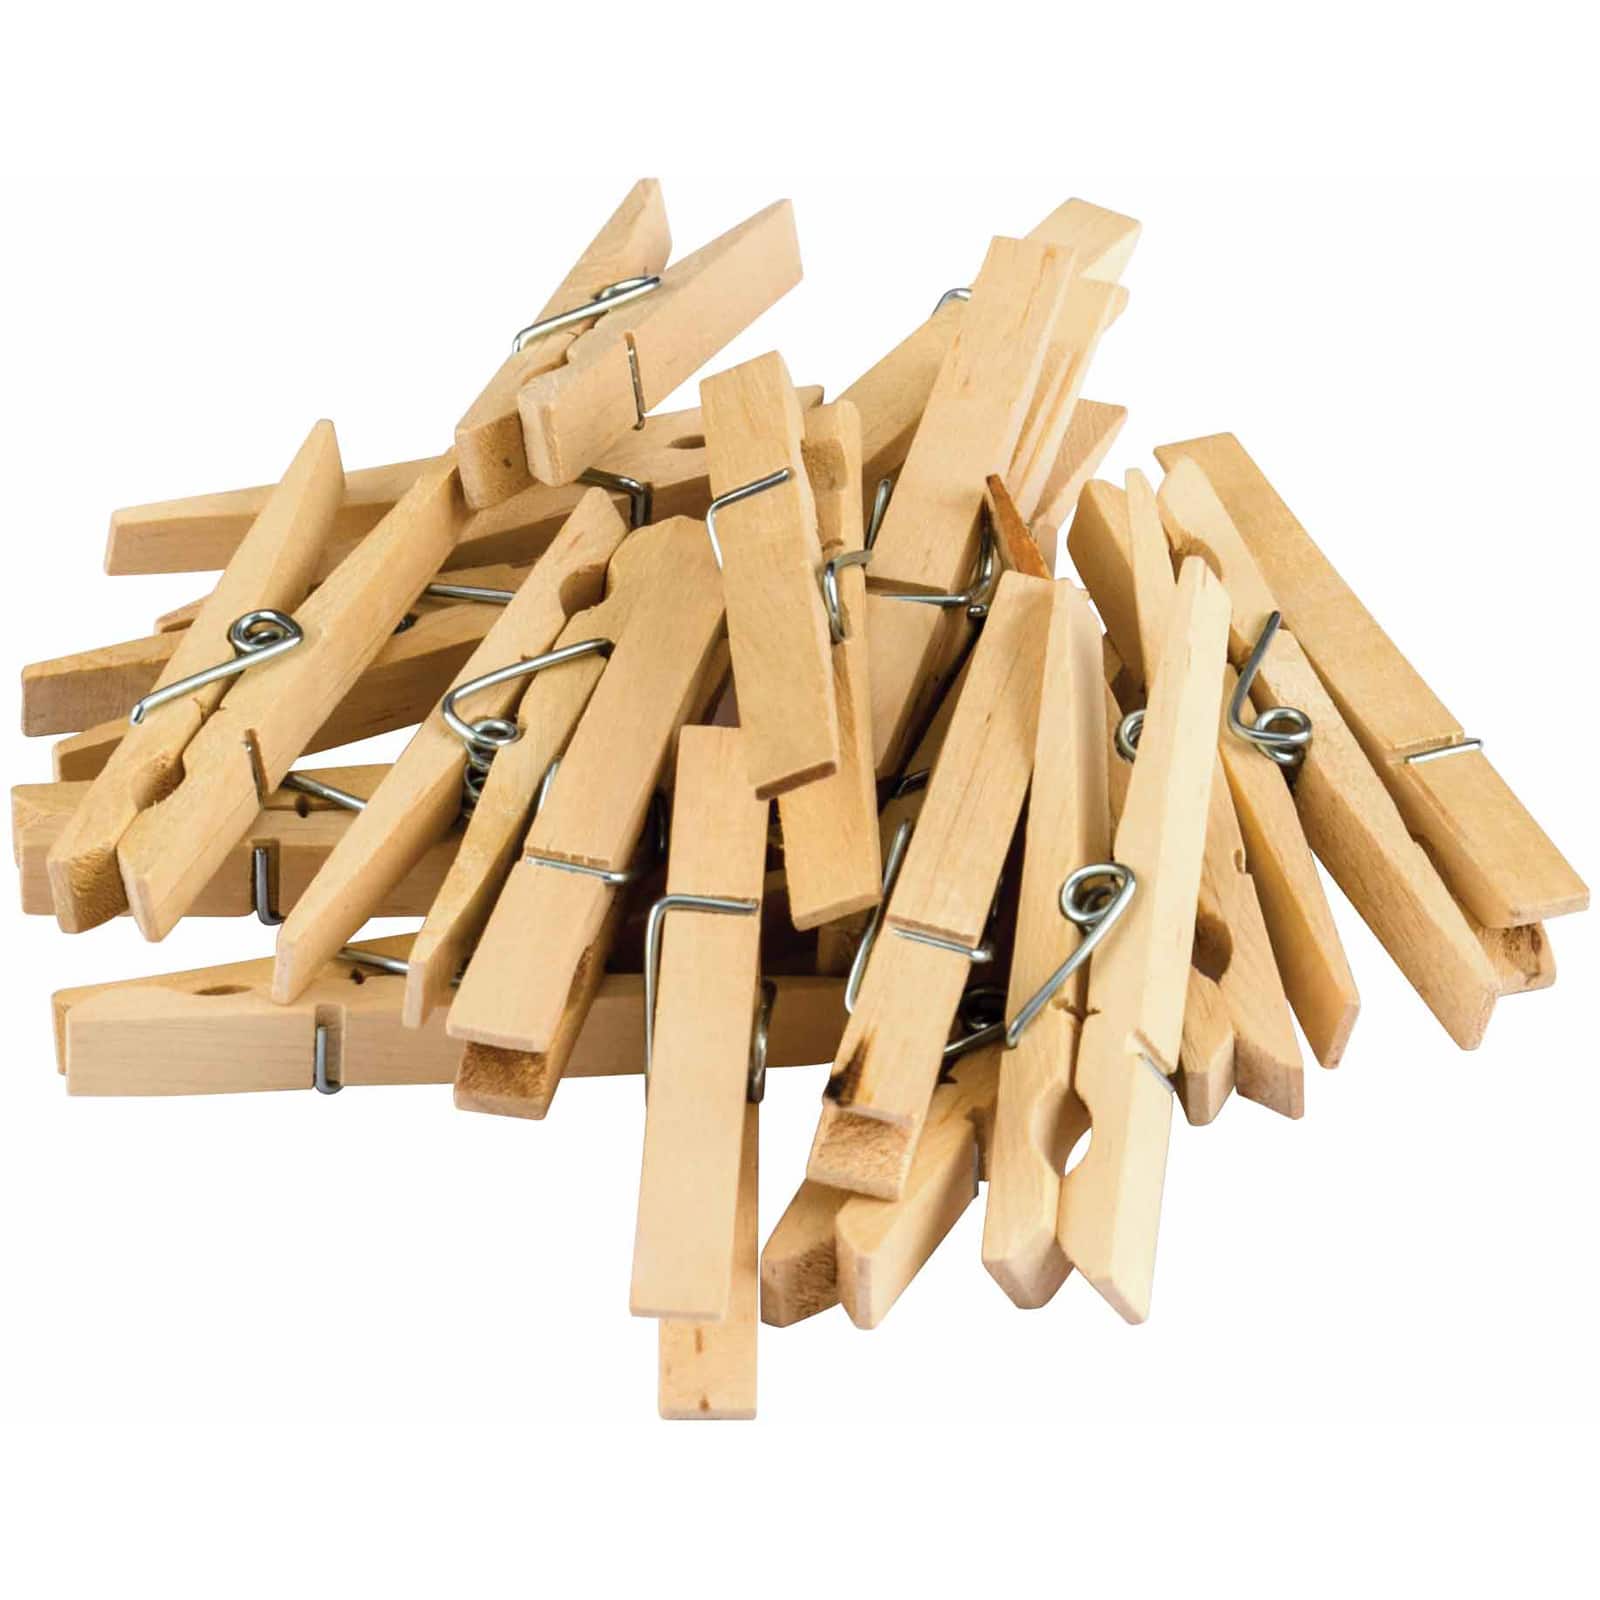 Teacher Created Resources STEM Basics Clothespins, 3 packs of 50, Michaels